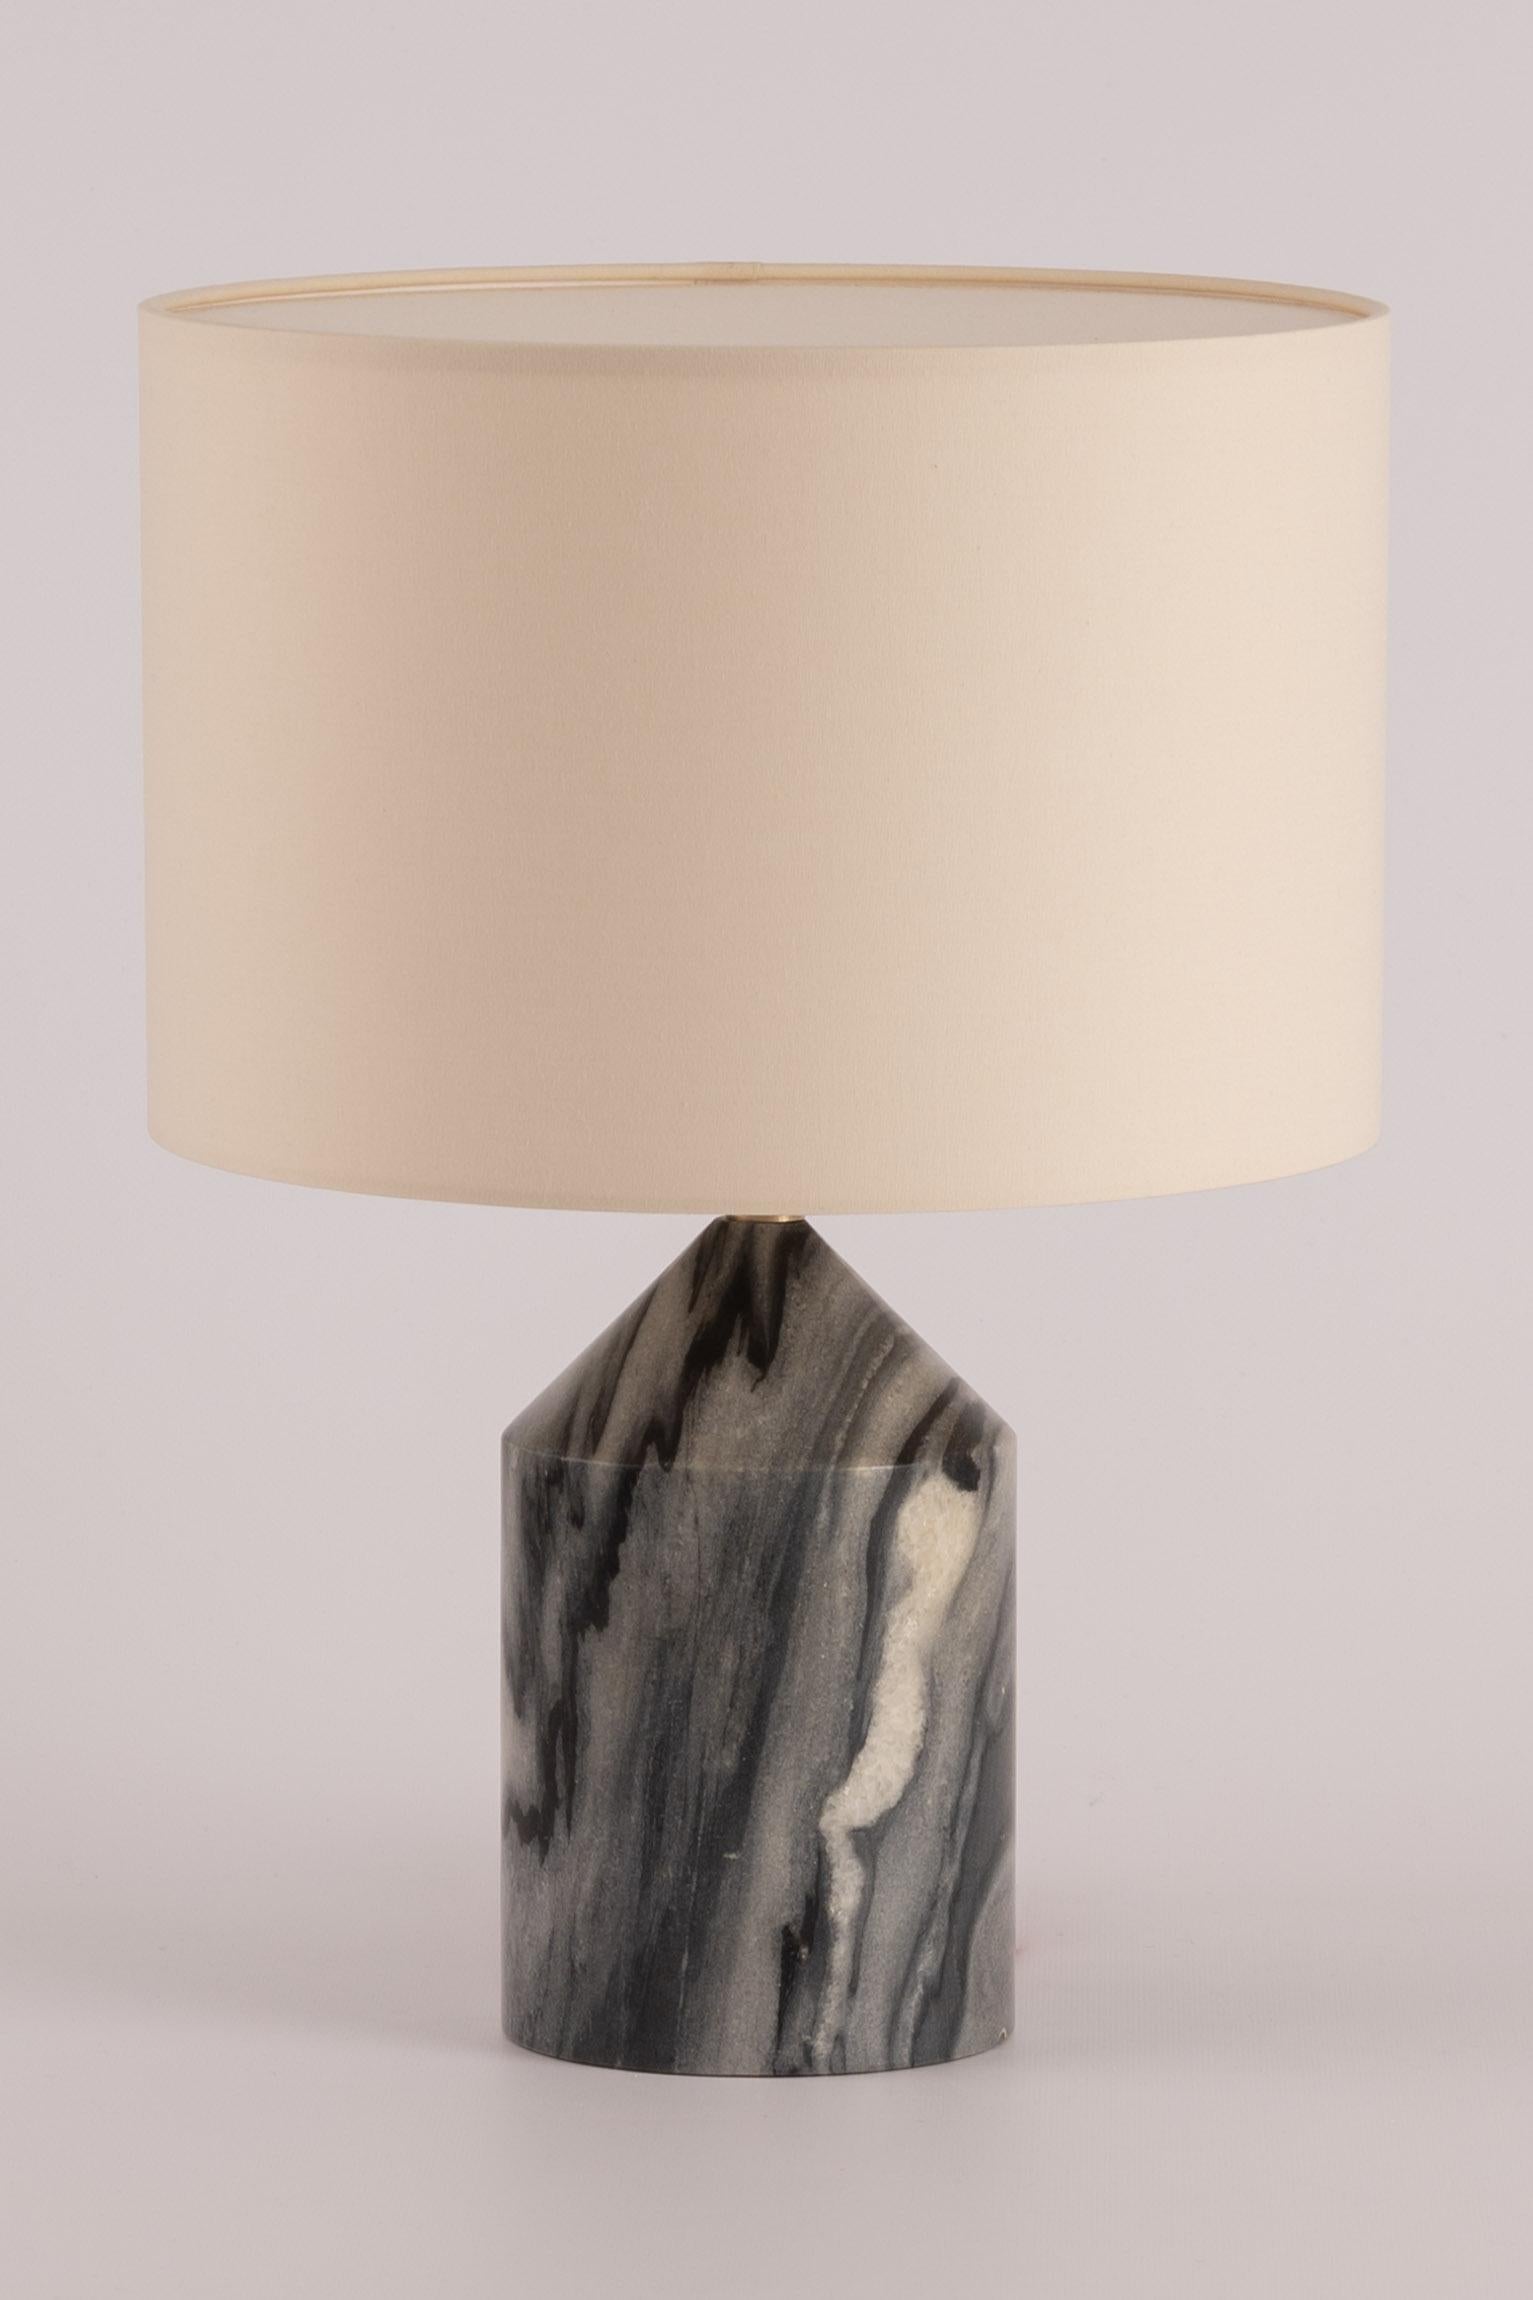 Black Marble Josef Table Lamp by Simone & Marcel
Dimensions: Ø 30 x H 41.5 cm.
Materials: Brass, cotton and black marble.

Also available in different marble, wood and alabaster options and finishes. Custom options available on request. Please